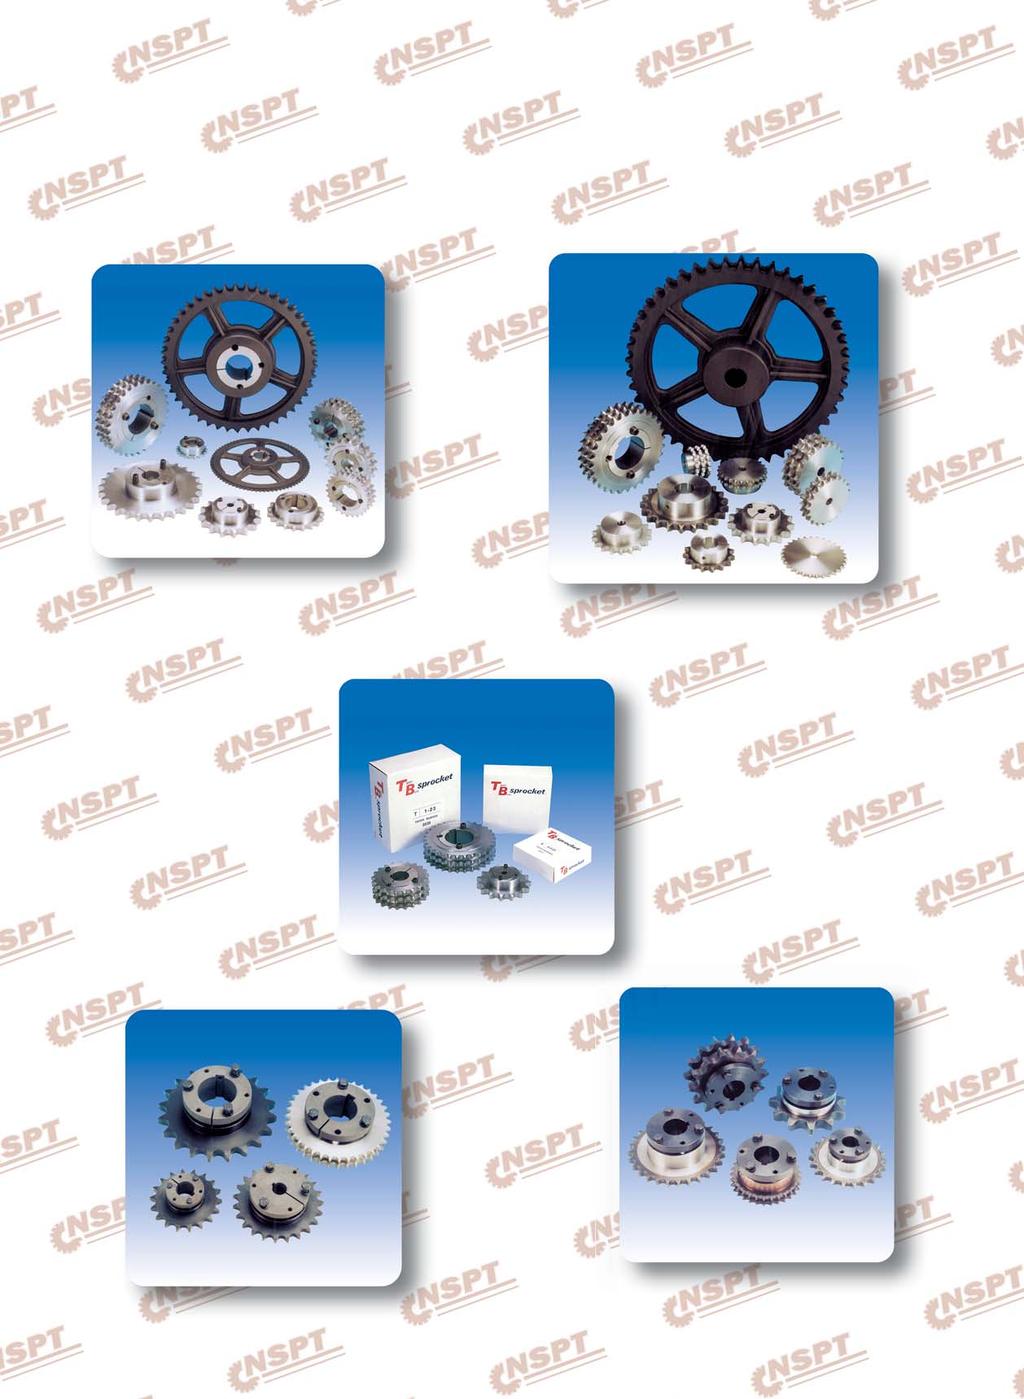 Whole Series of BTL Sprockets All Kinds of Chain Wheels Commercial Grade